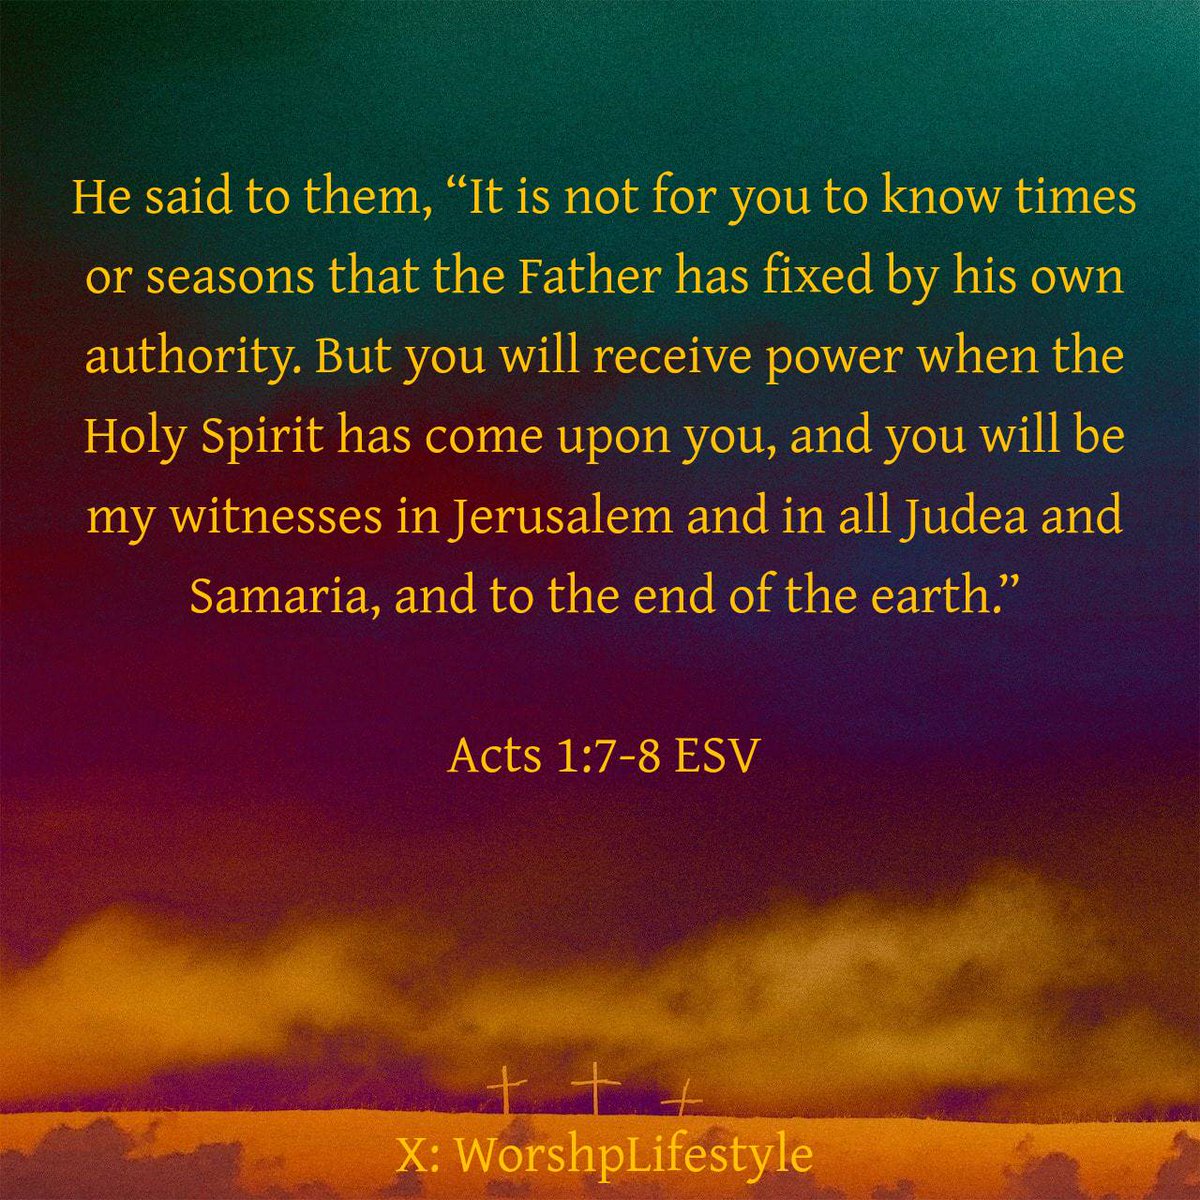 Acts1:7-8
...It is not for you to know times or seasons that the Father has fixed by his own authority. But you will receive power when the Holy Spirit has come upon you &you will be my witnesses in Jerusalem and in all Judea & Samaria &to the end of the earth
#WorshpLifestyle